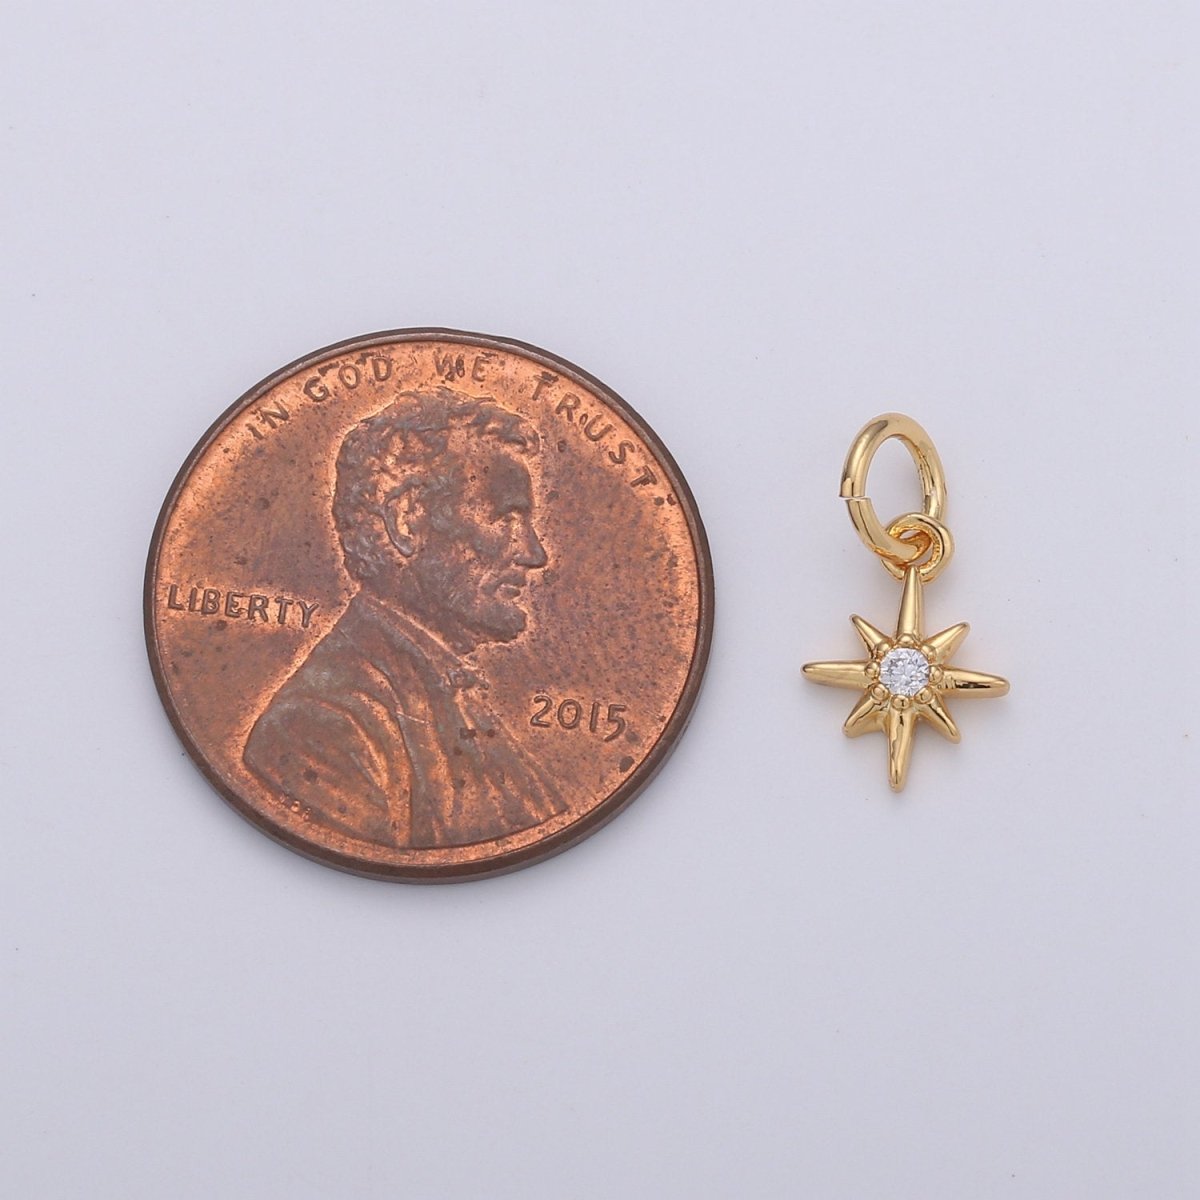 OS 24k Gold Filled Tiny Star Charm Gold North Star Charm Micro Pave Celestial Charm GF Necklace Bracelet Earring Jewelry Making Supply D-080 - DLUXCA